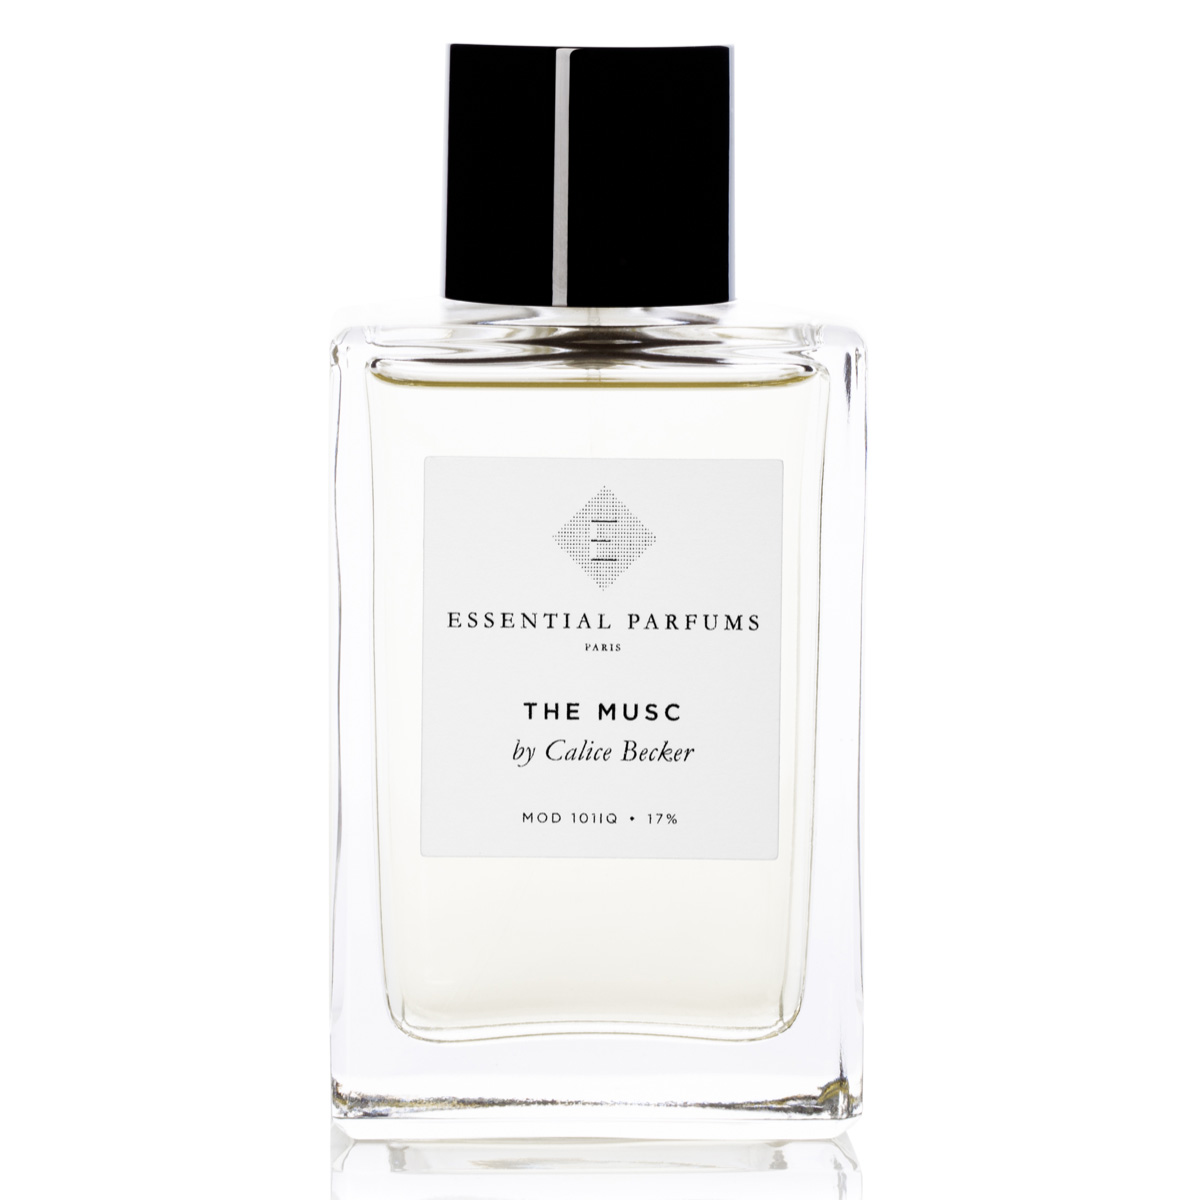 The Musc - Essential parfums